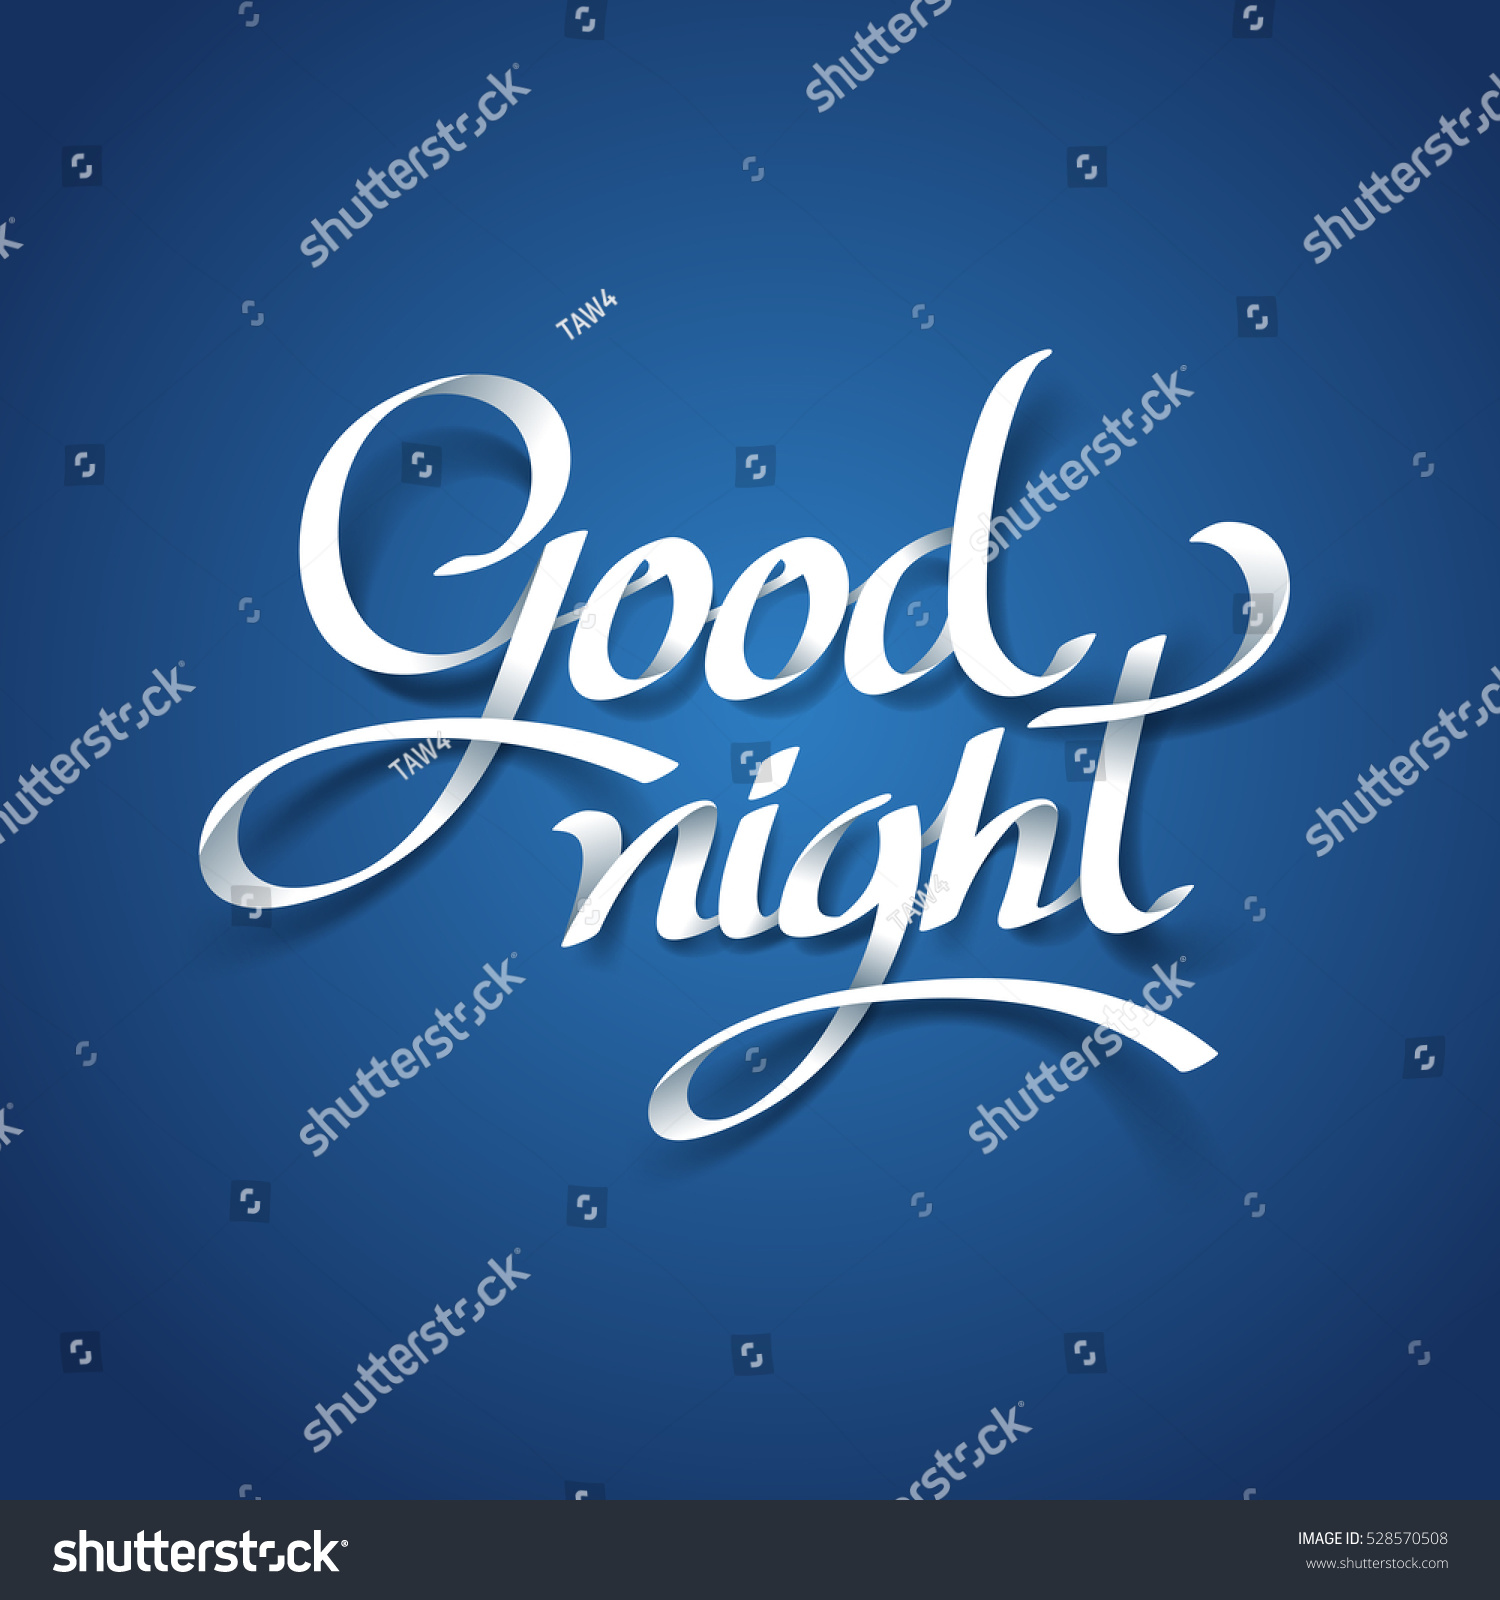 Paper Art Of Goodnight Calligraphy Hand Lettering, Vector Art And ...